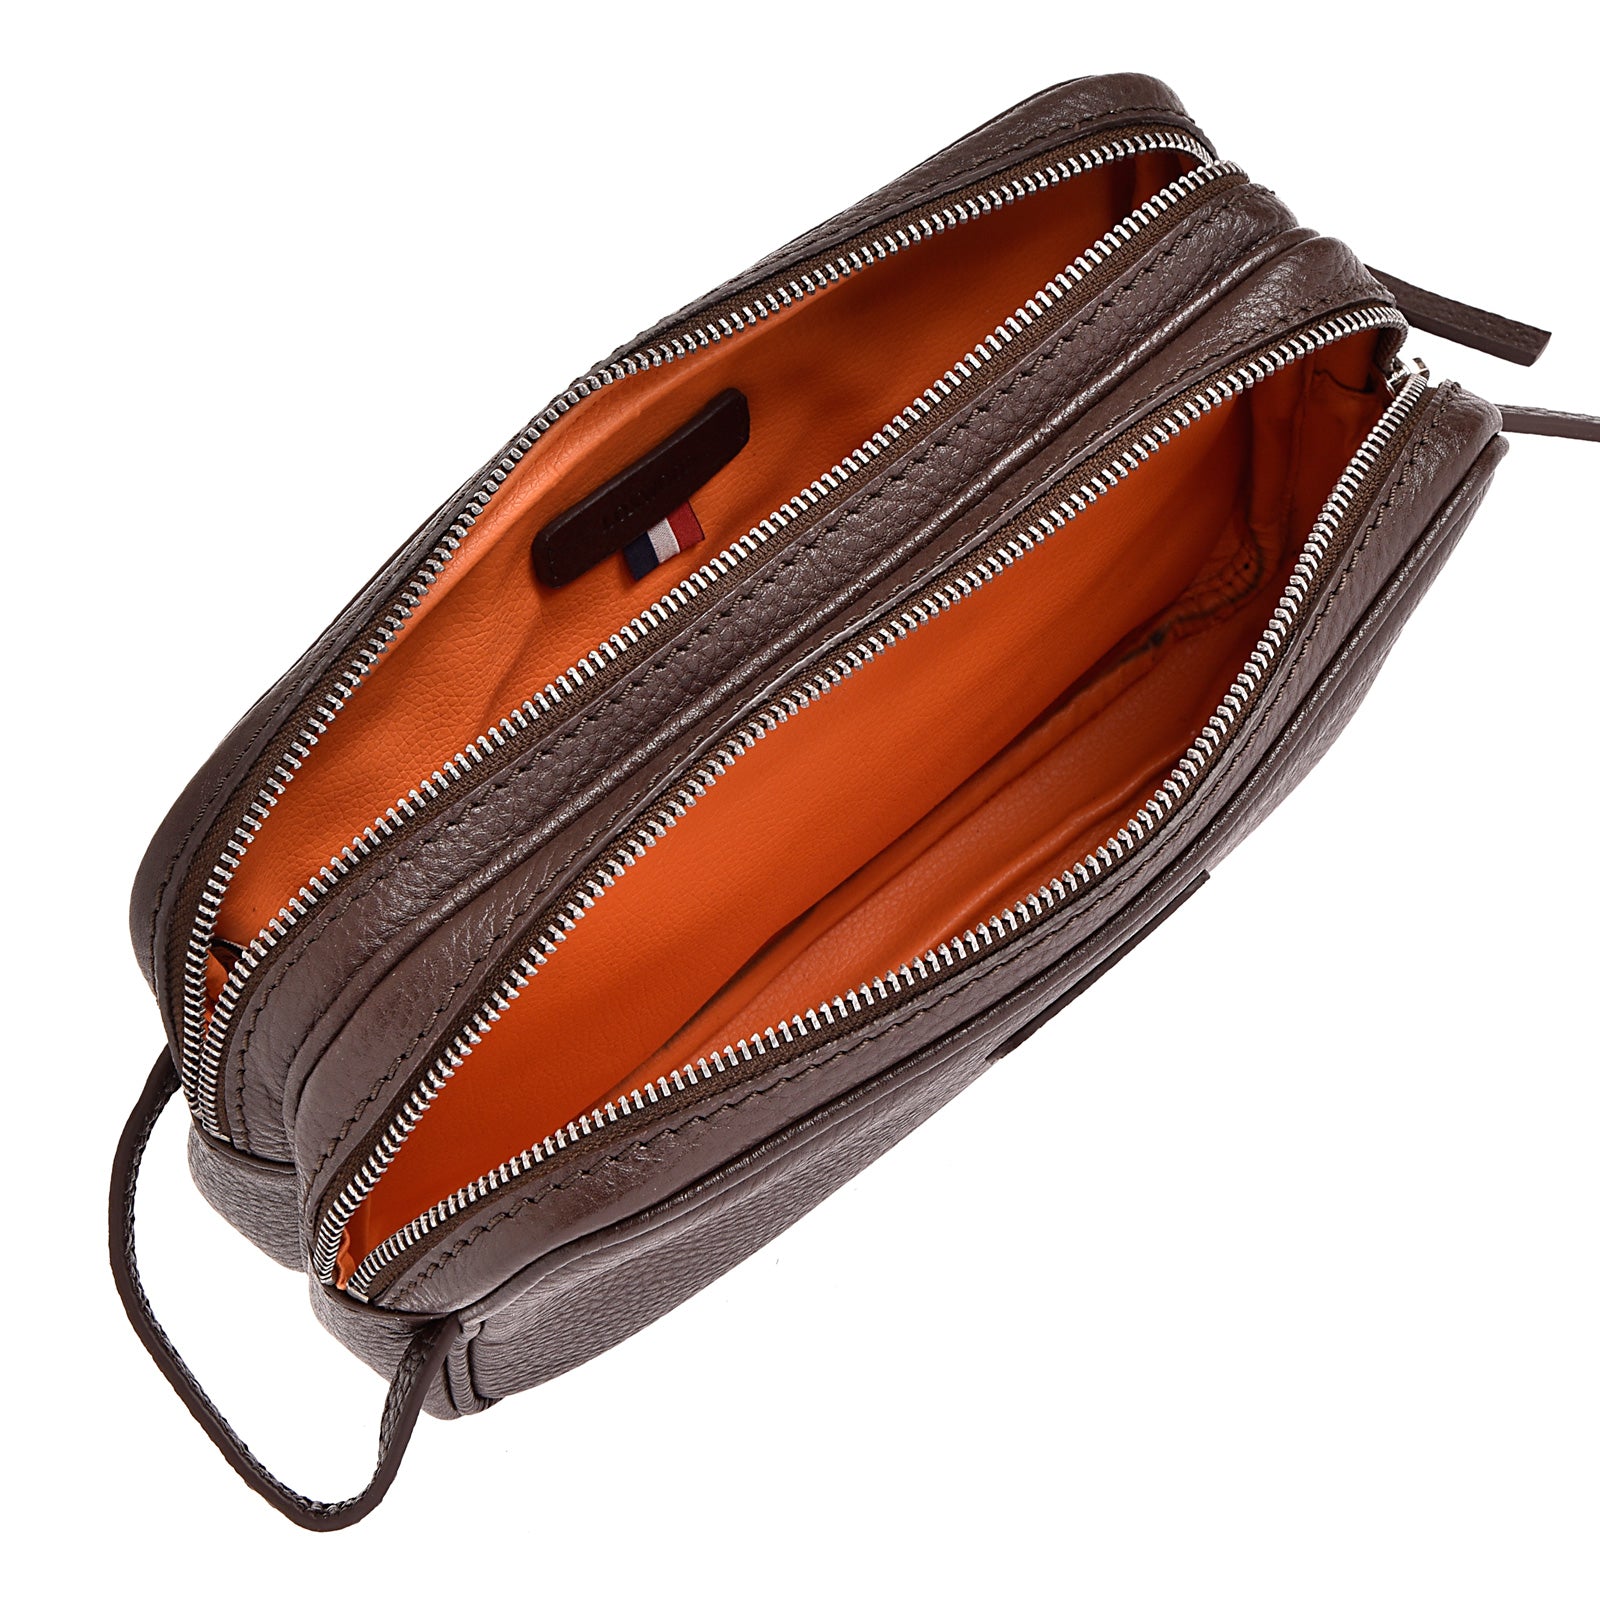 DOUBLE ZIP TOILETRIES BAG - Grained Leather